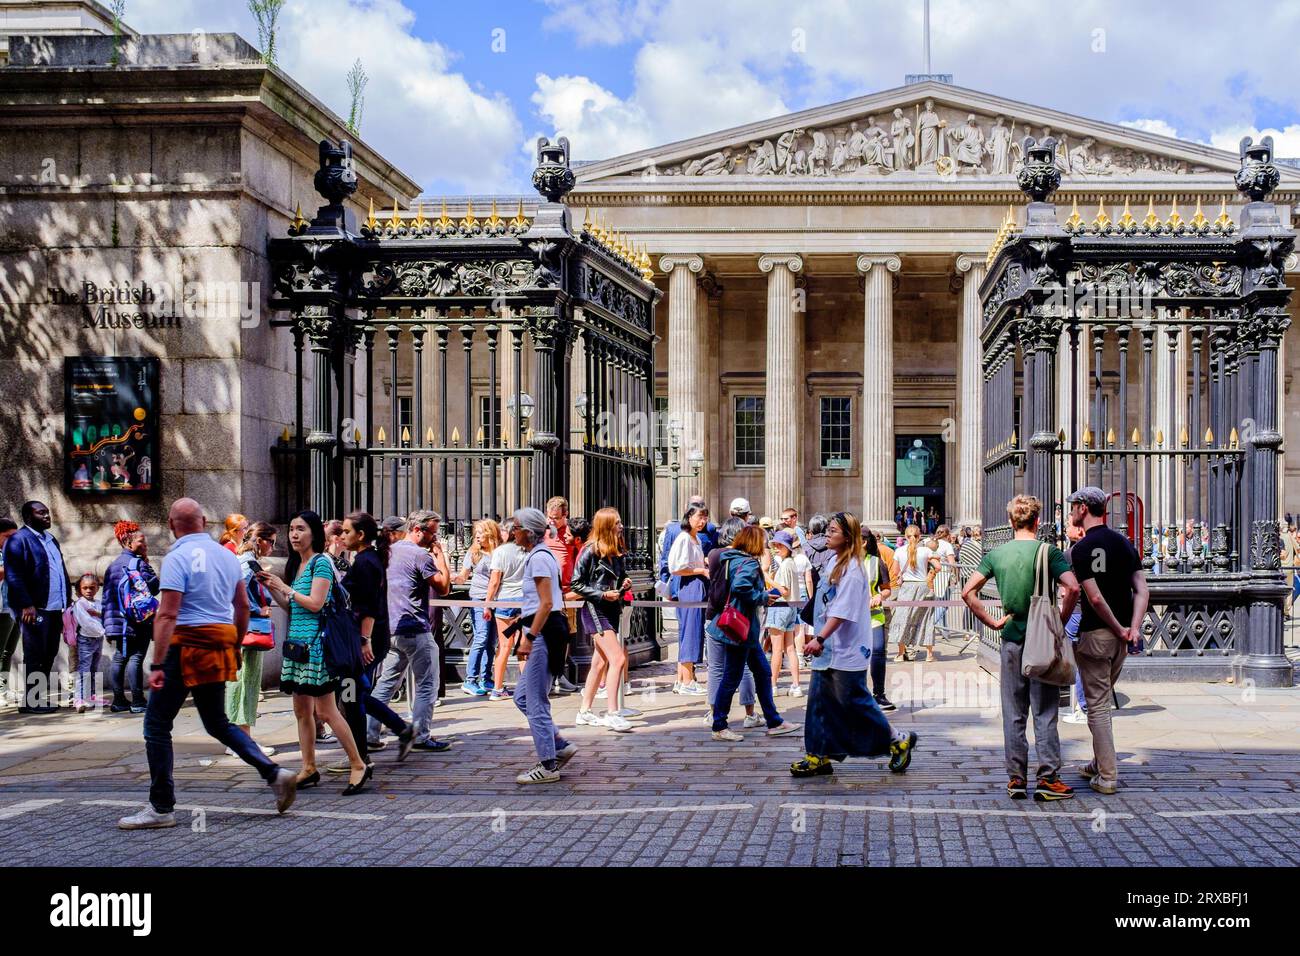 Visitors to the British Museum queue outside for entry to the museum, London, UK. Stock Photo